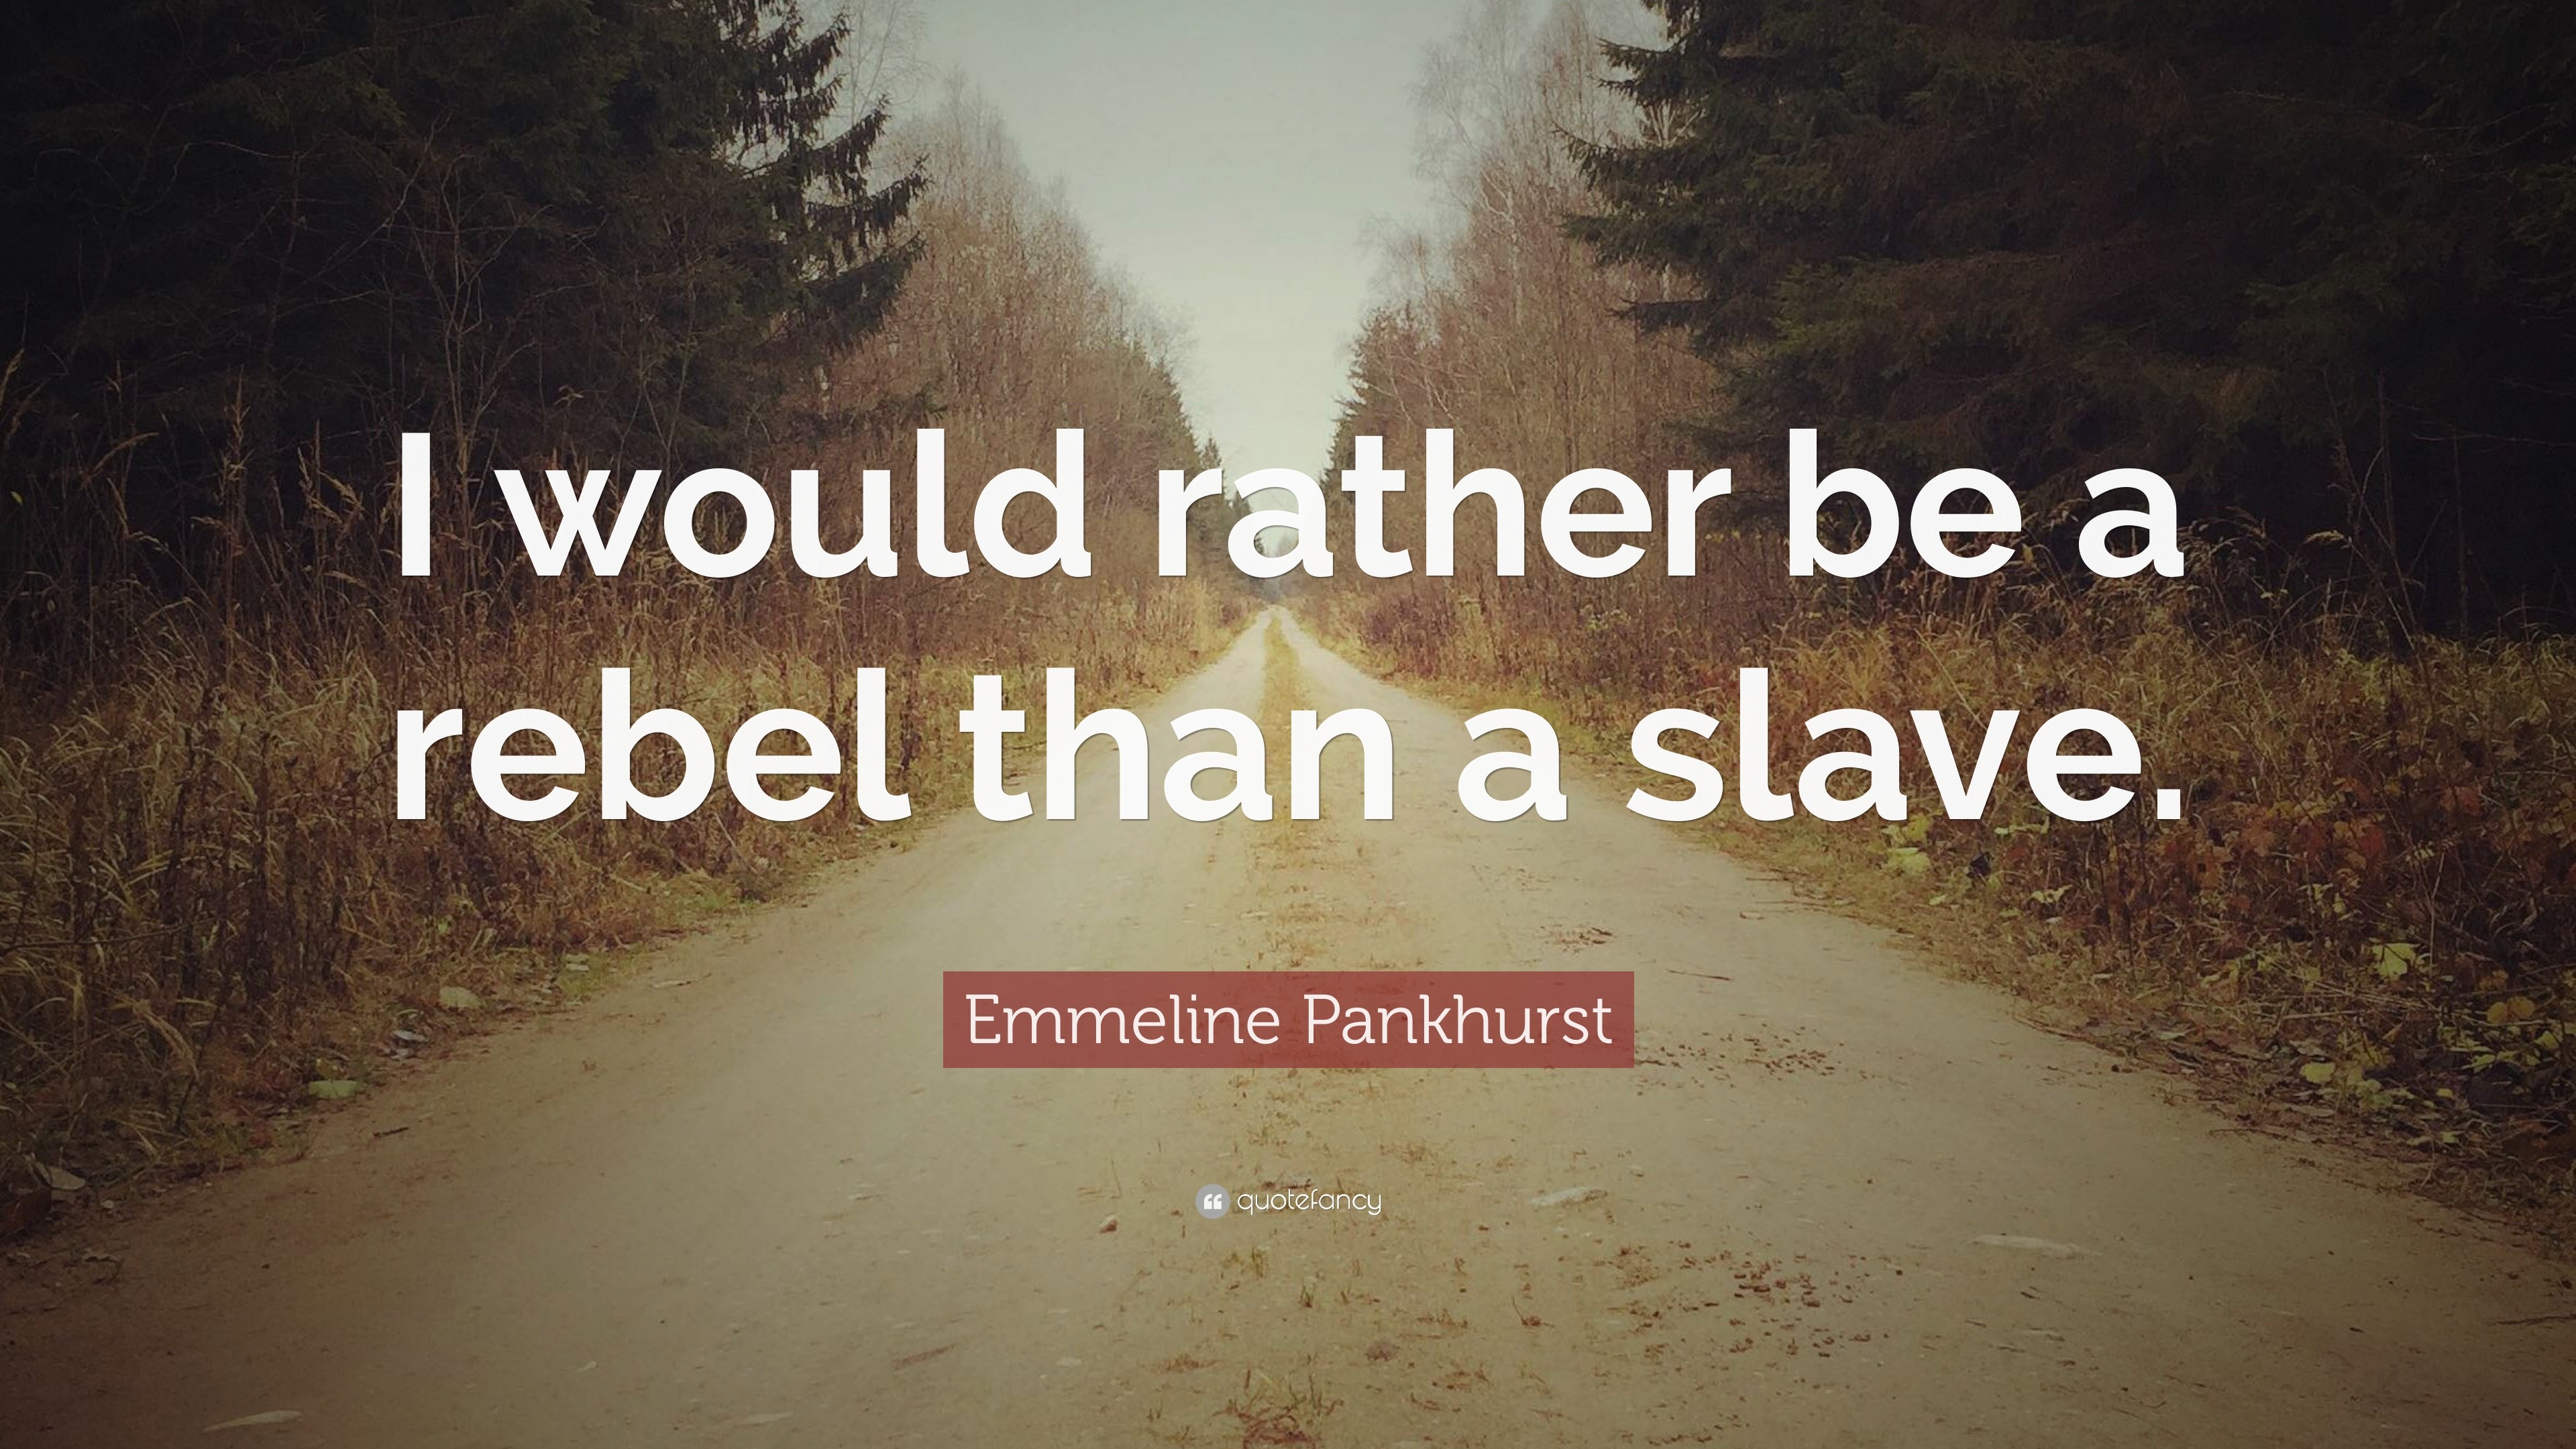 Emmeline Pankhurst Quote “I would rather be a rebel than